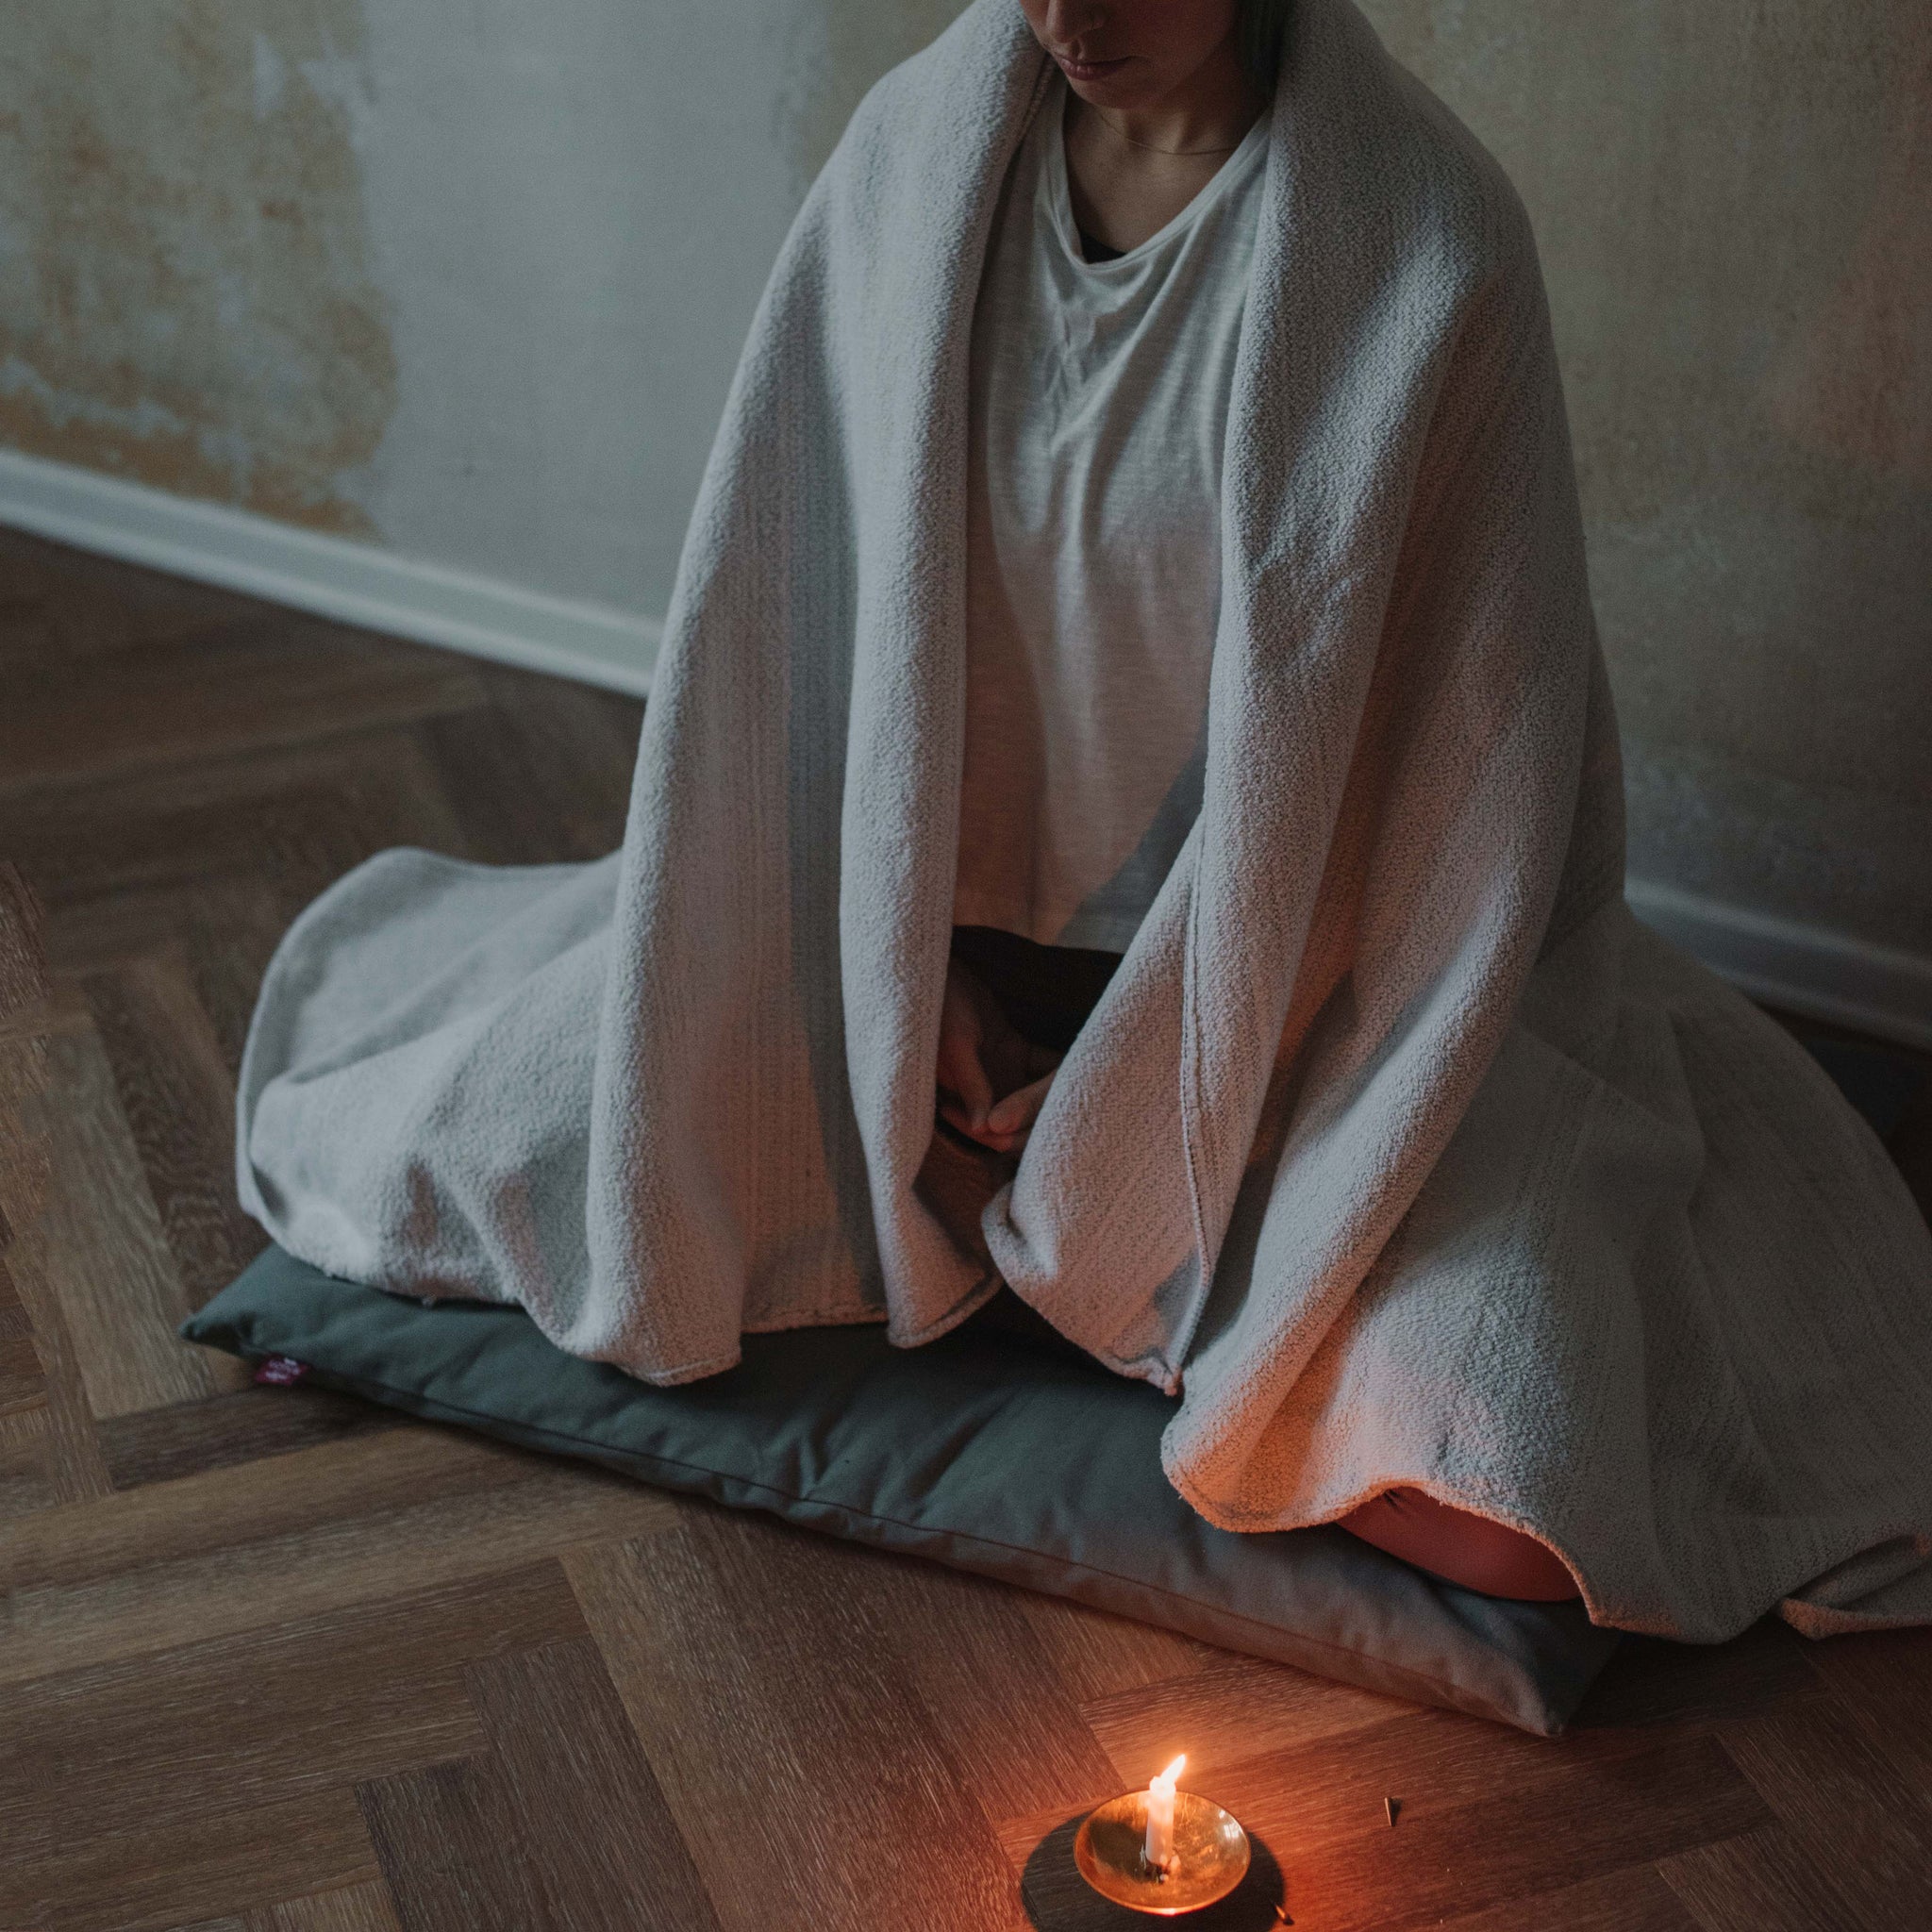 Guided Visualisation Meditation class with Katy Scherer